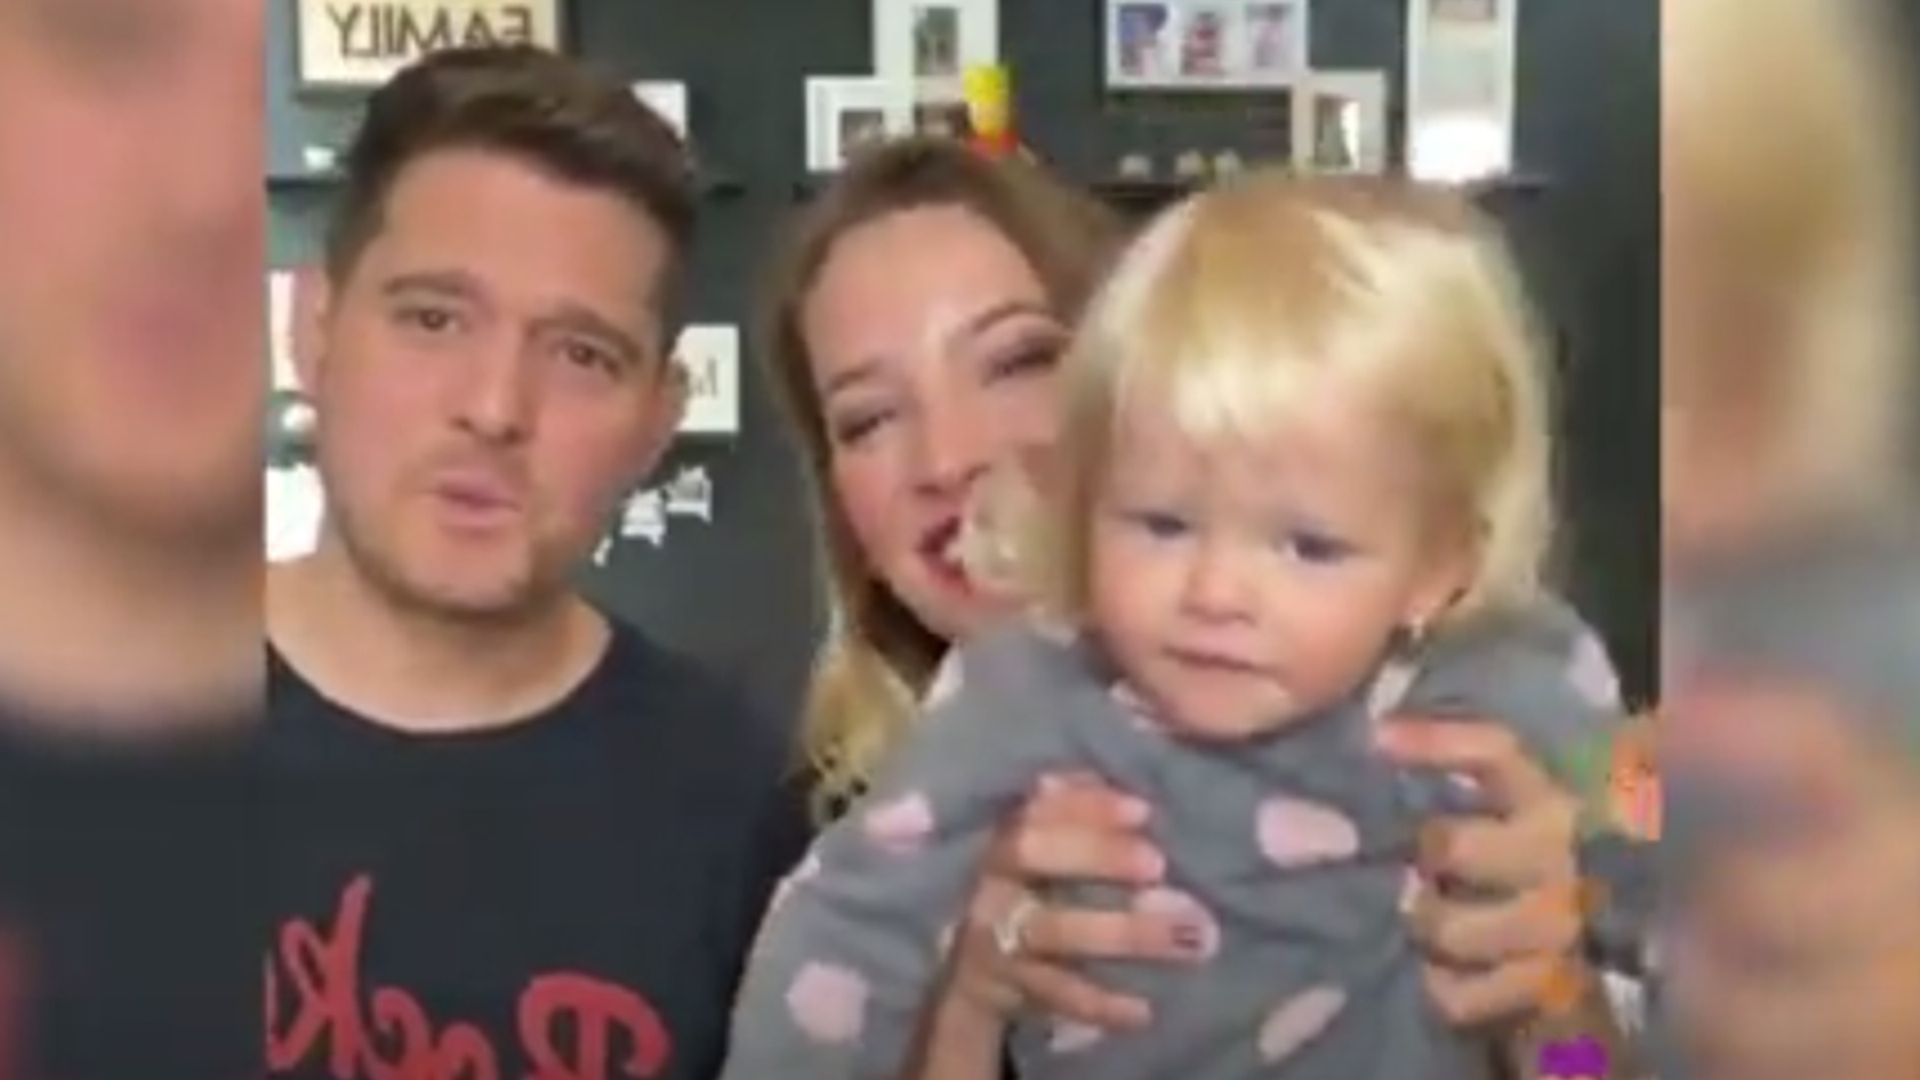 Michael Buble's daughter Vida steals the show as she sings with her dad in an Instagram video!